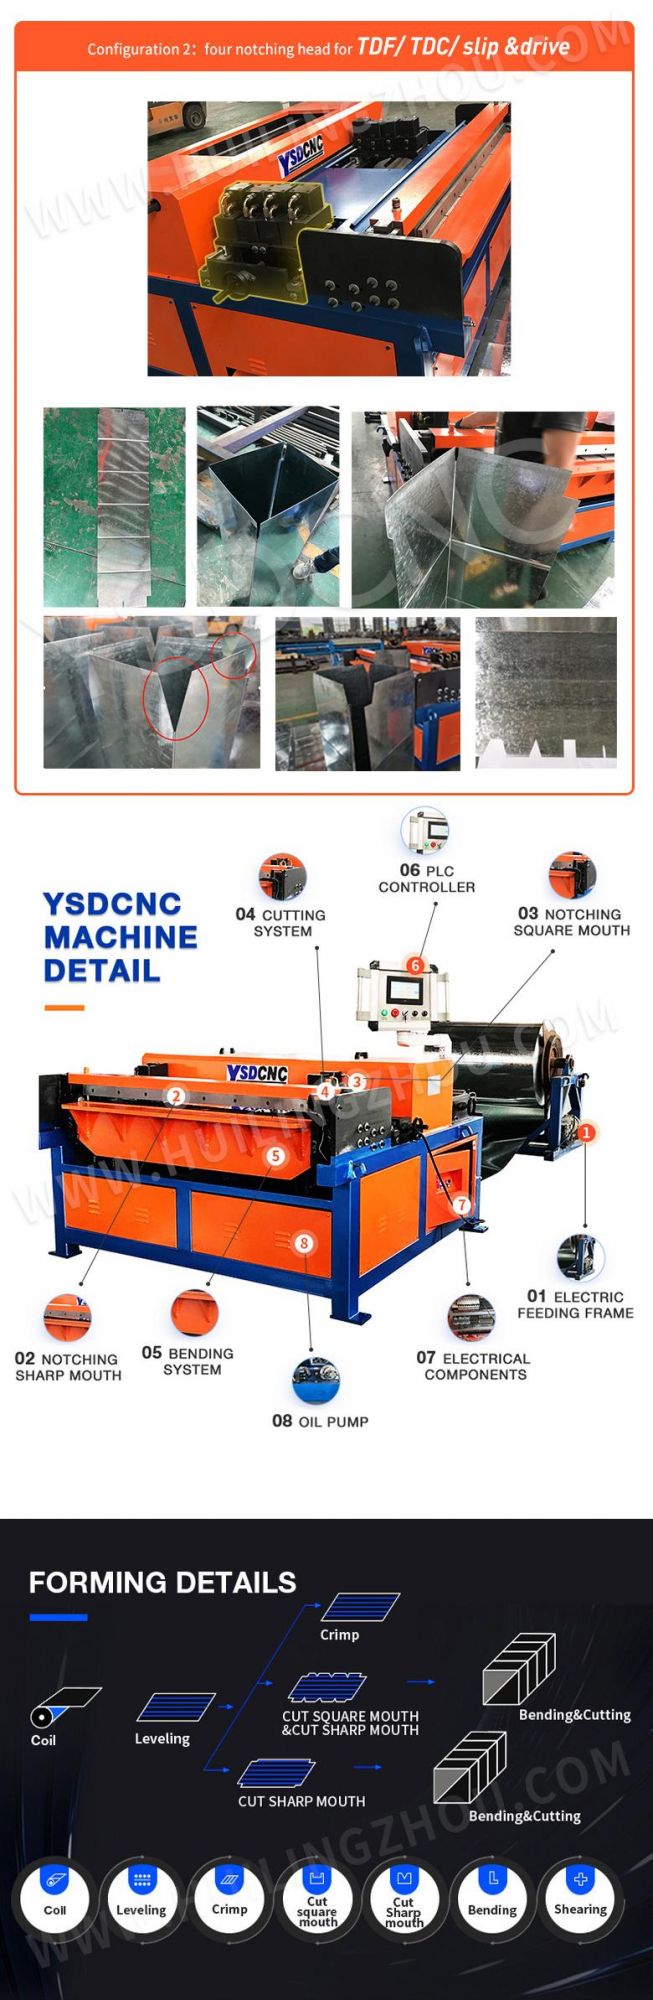 Factory Hot Selling Square Duct Making Machine /Air Ducts Manufacture Auto Line V/Rectangular Air Pipe Forming Line 2 3 4